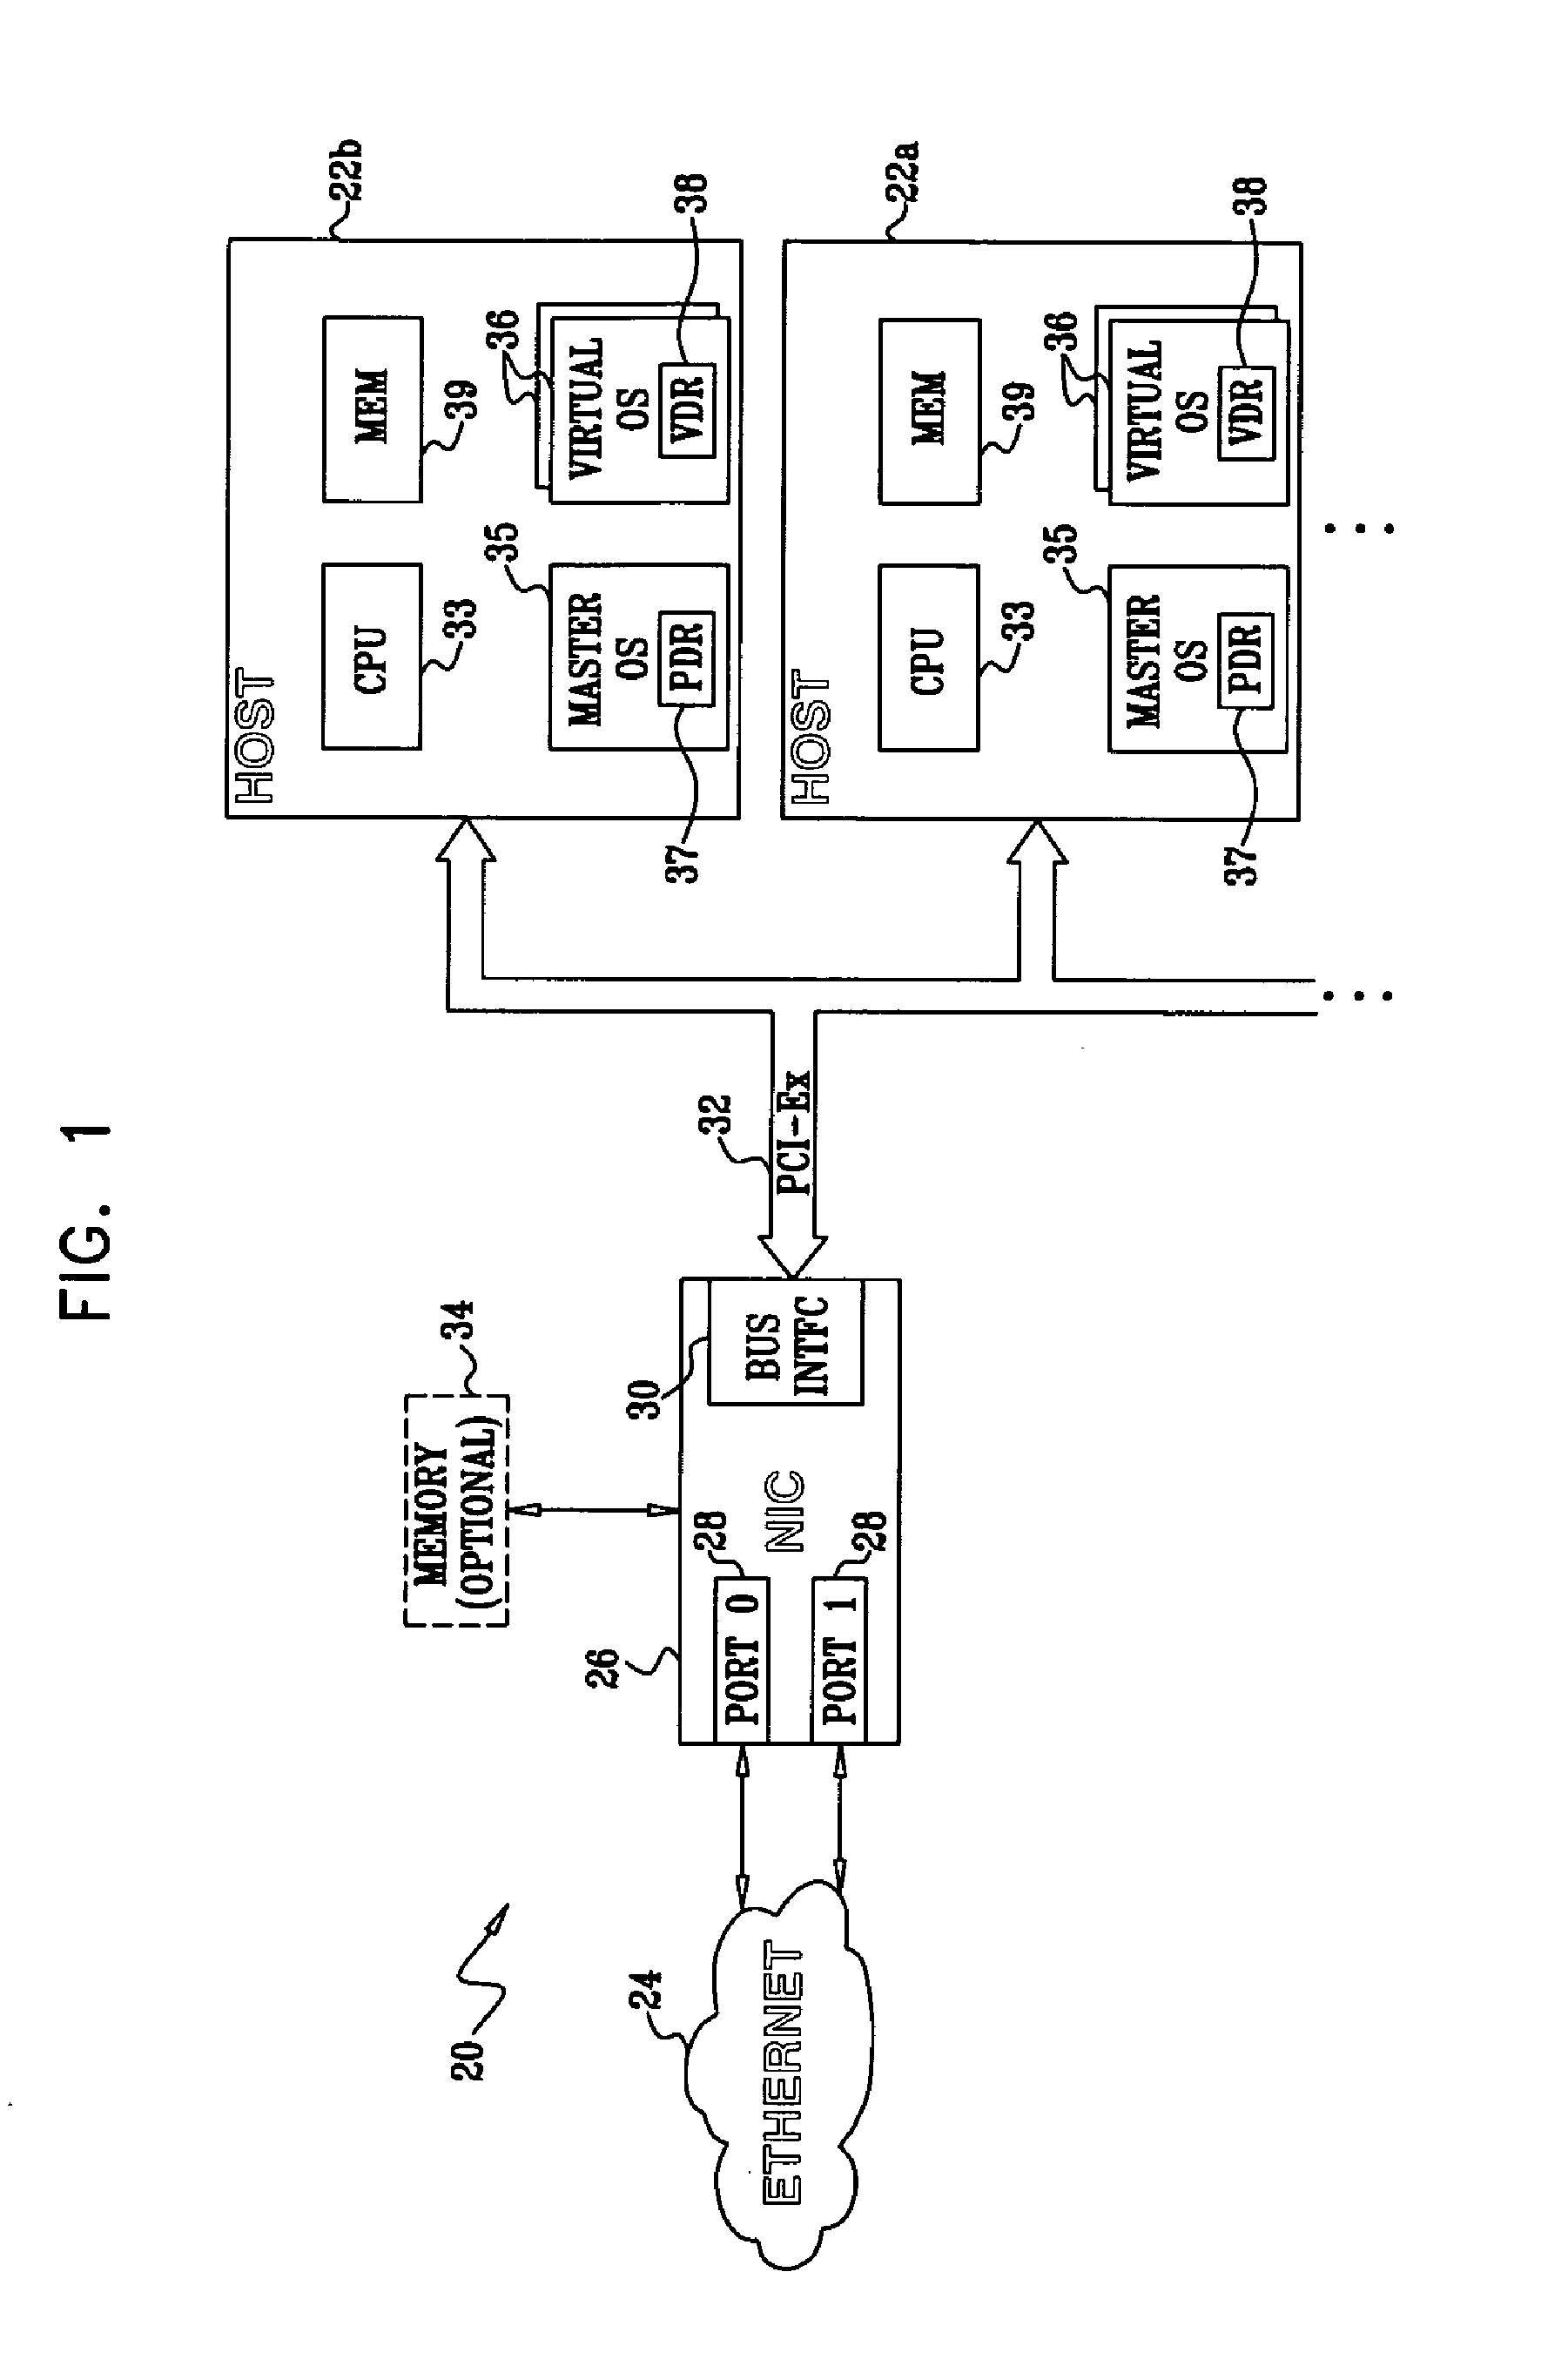 Network interface device with flow-oriented bus interface